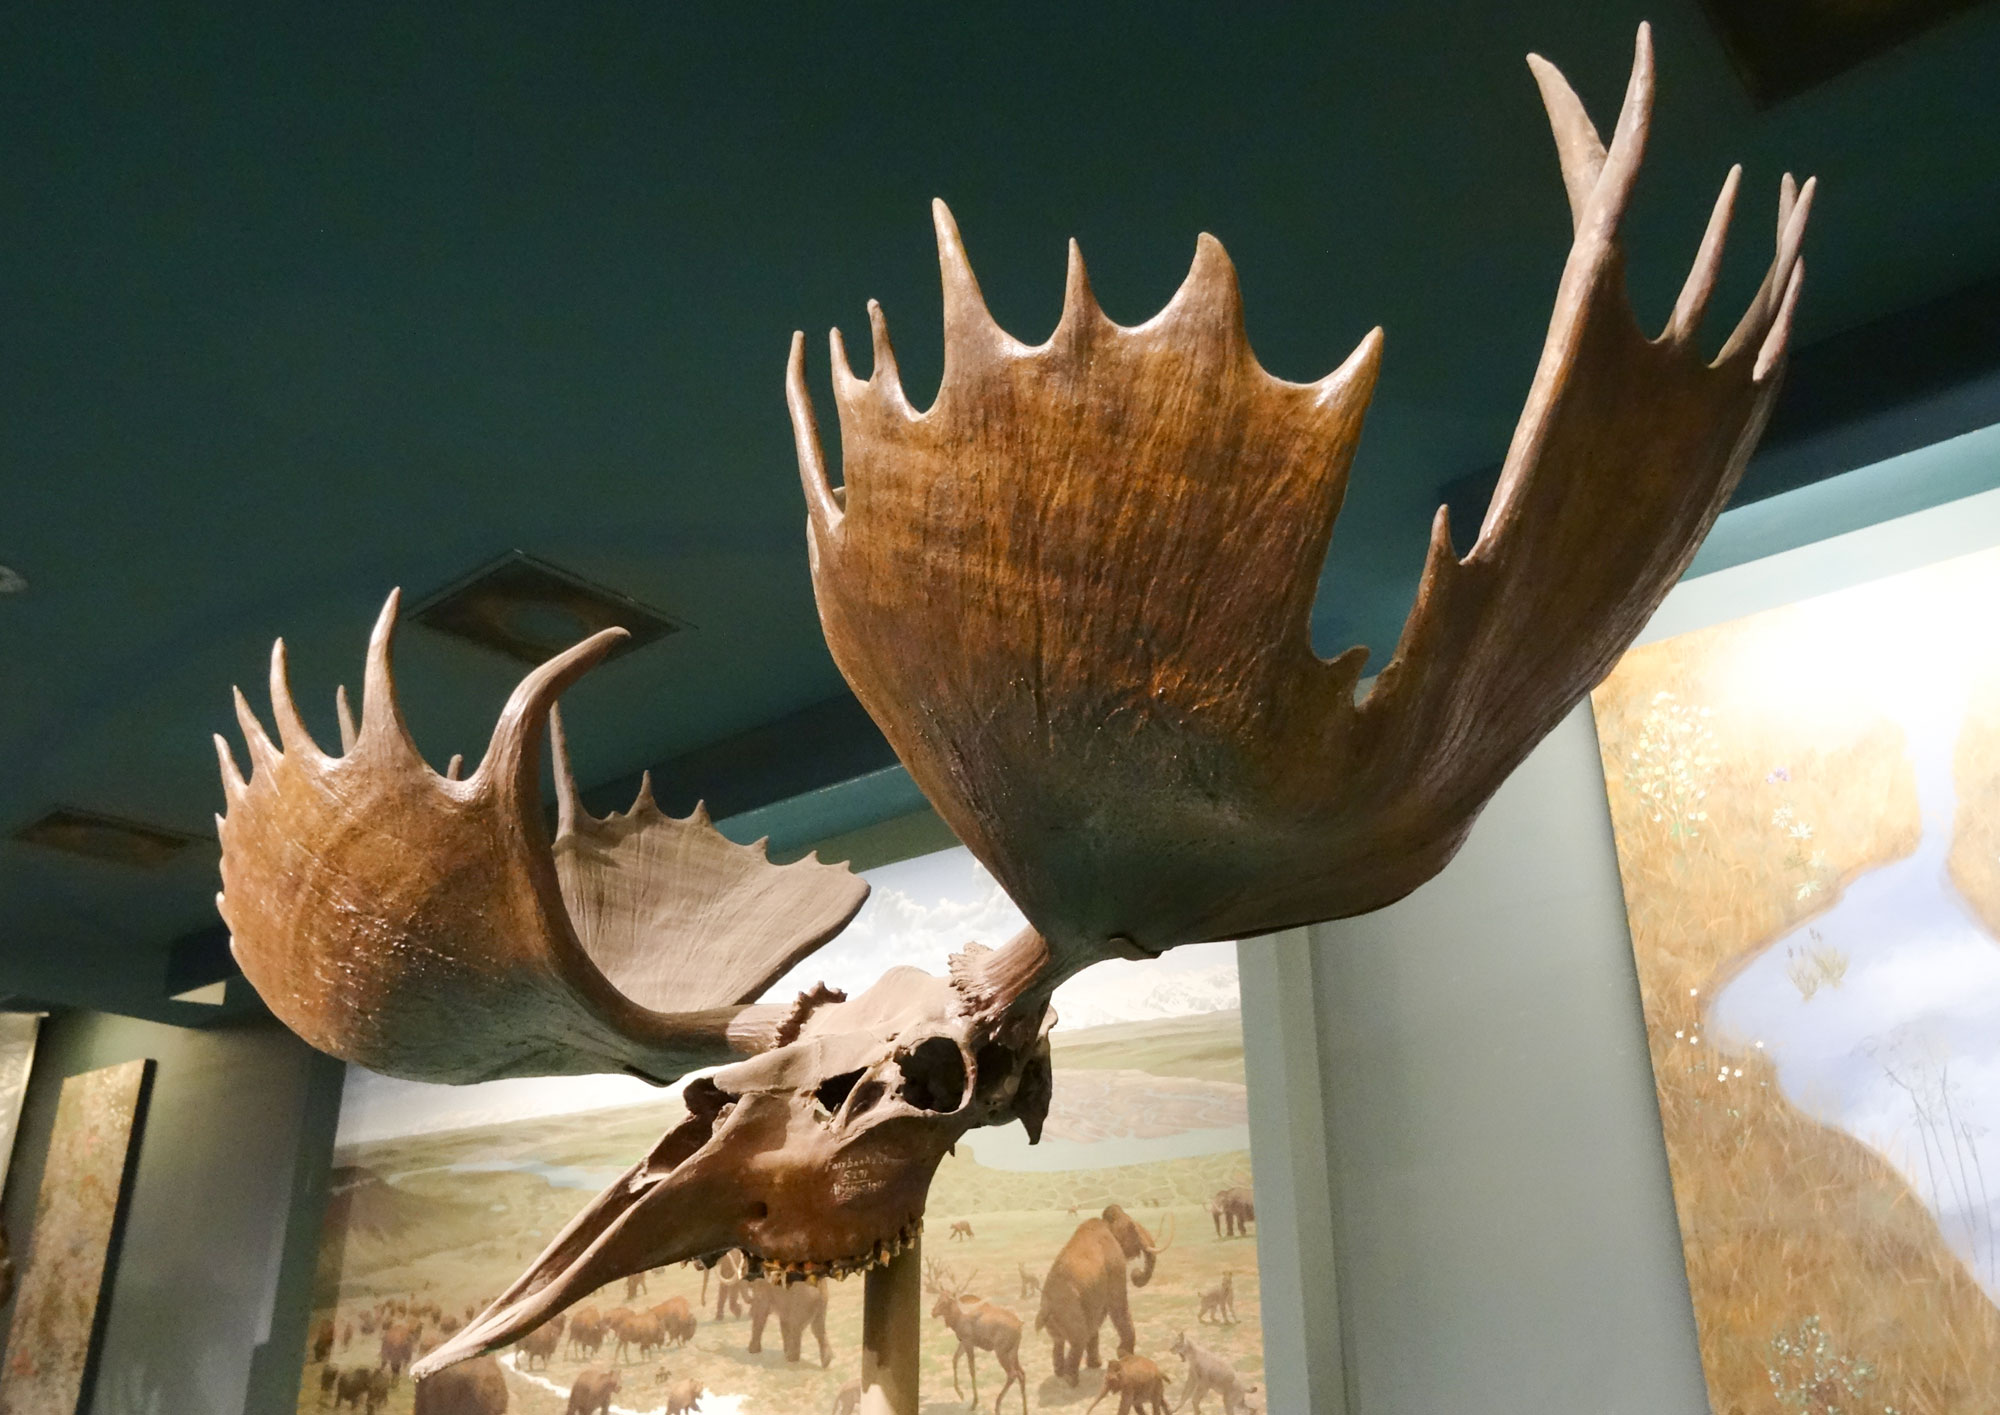 Photograph of the skull of a moose from the Pleistocene of Alaska on display in a museum. The skull is dark brown and has large, flat horns that splay outward and turn slightly upward. The horns have jagged margins.